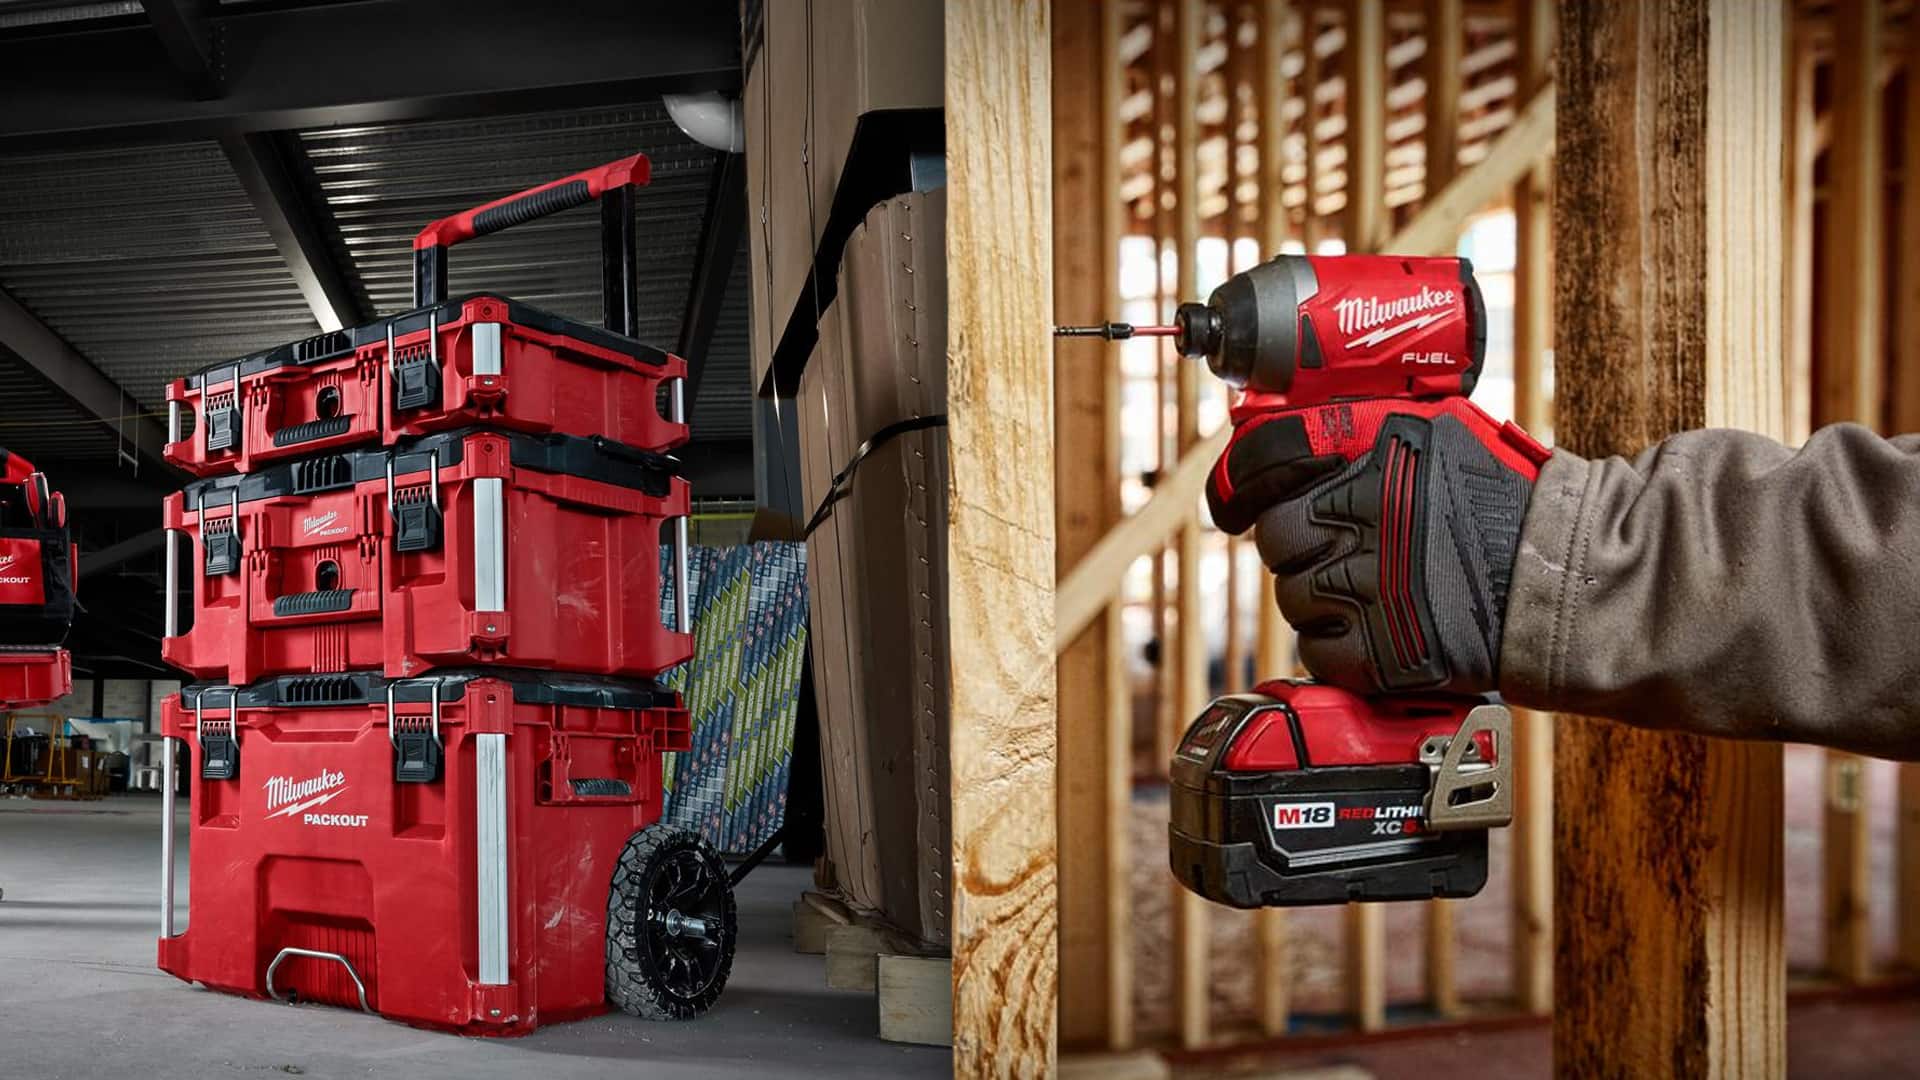 hero milwaukee tool set at a construction environment drilling